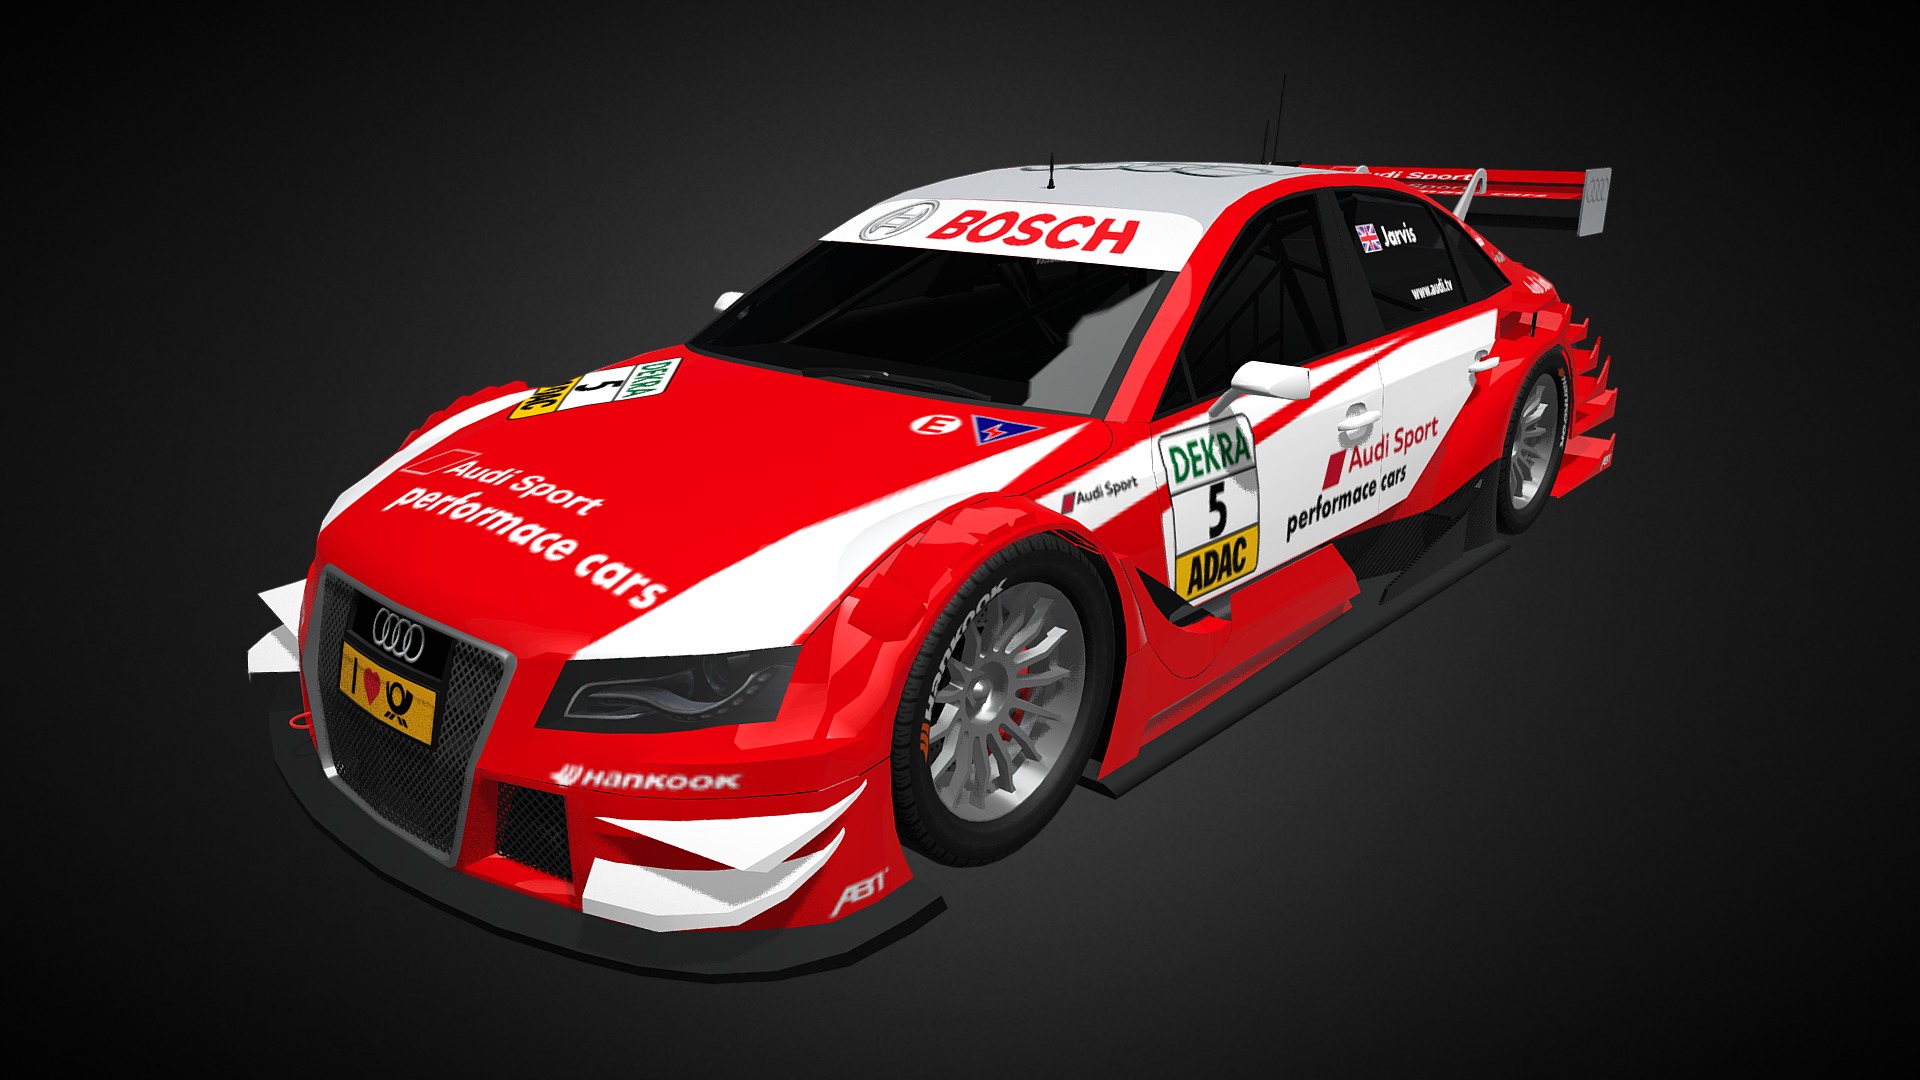 3D model Audi A4 DTM 2011 – Oliver Jarvis - This is a 3D model of the Audi A4 DTM 2011 - Oliver Jarvis. The 3D model is about a red and white race car.